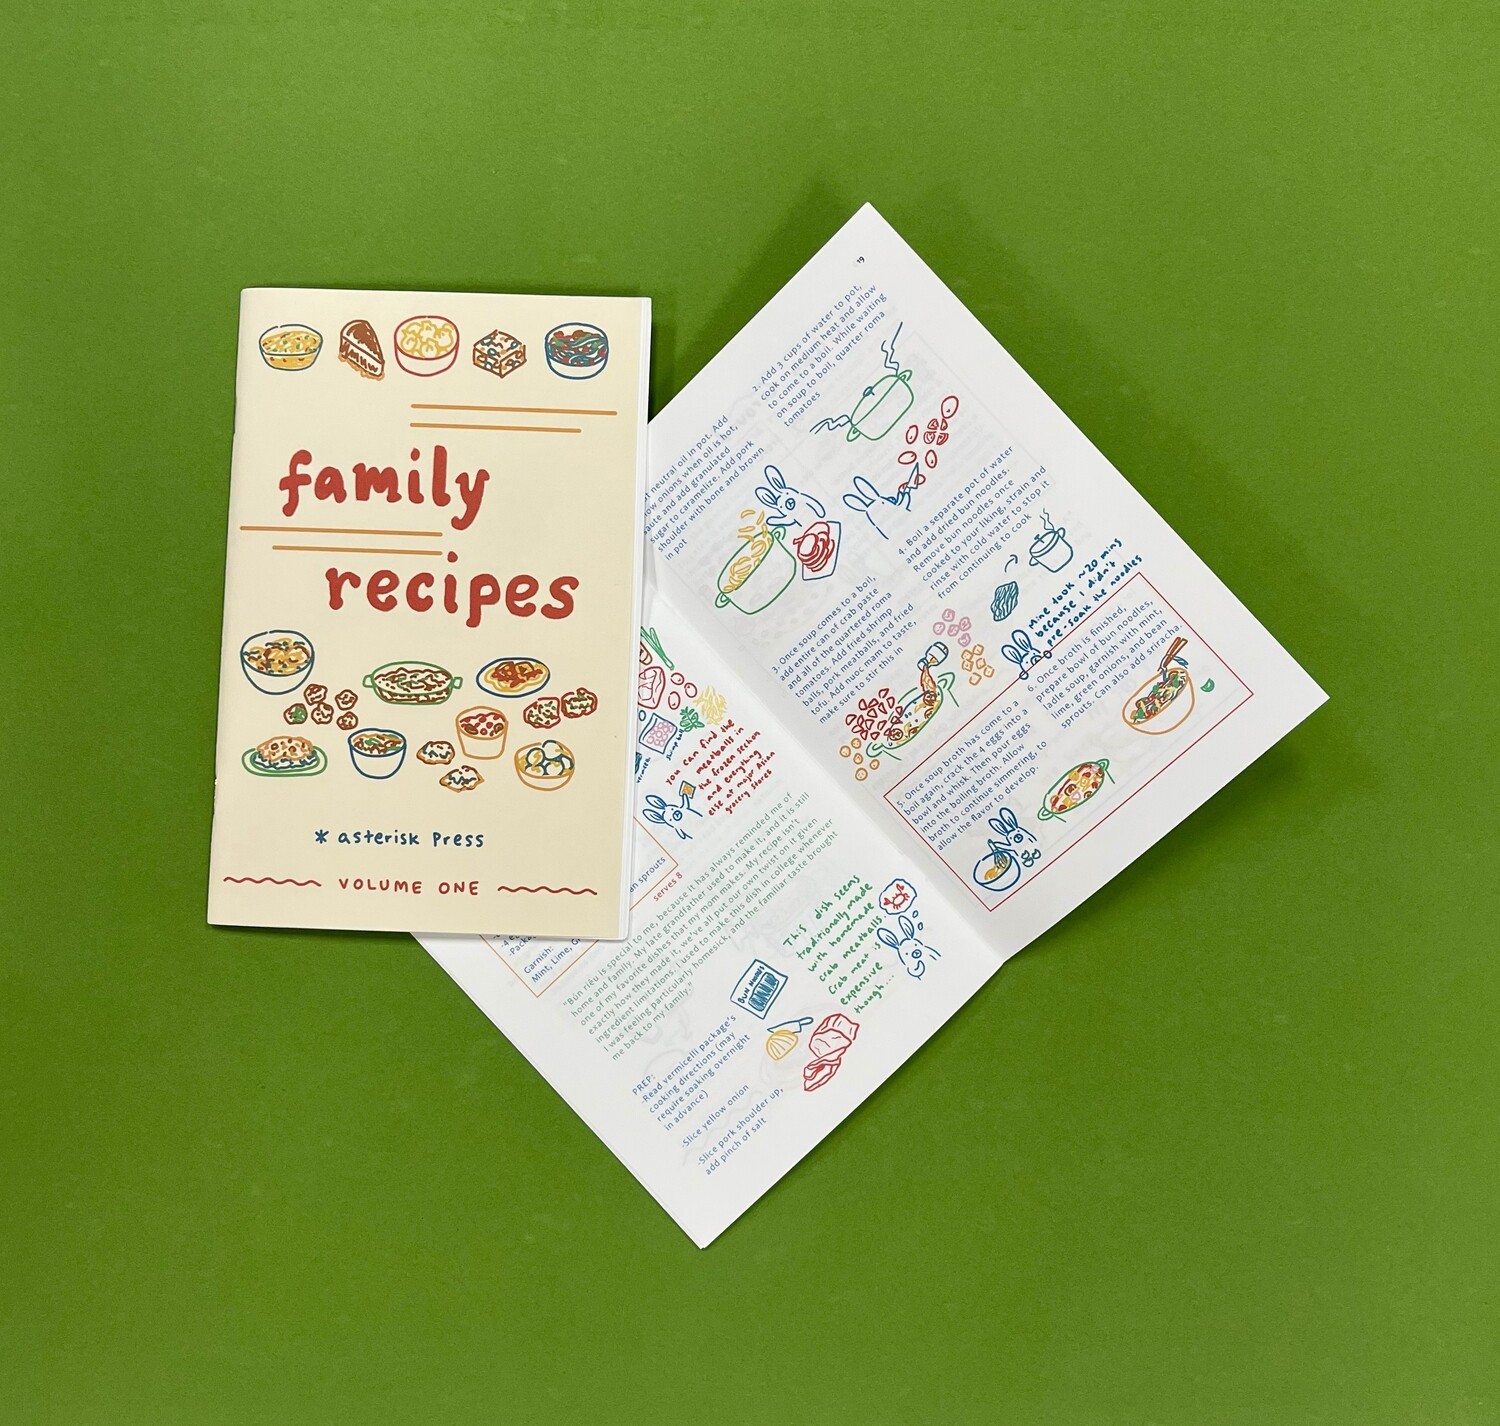 Family Recipes, a Food Comics Anthology: Volume One